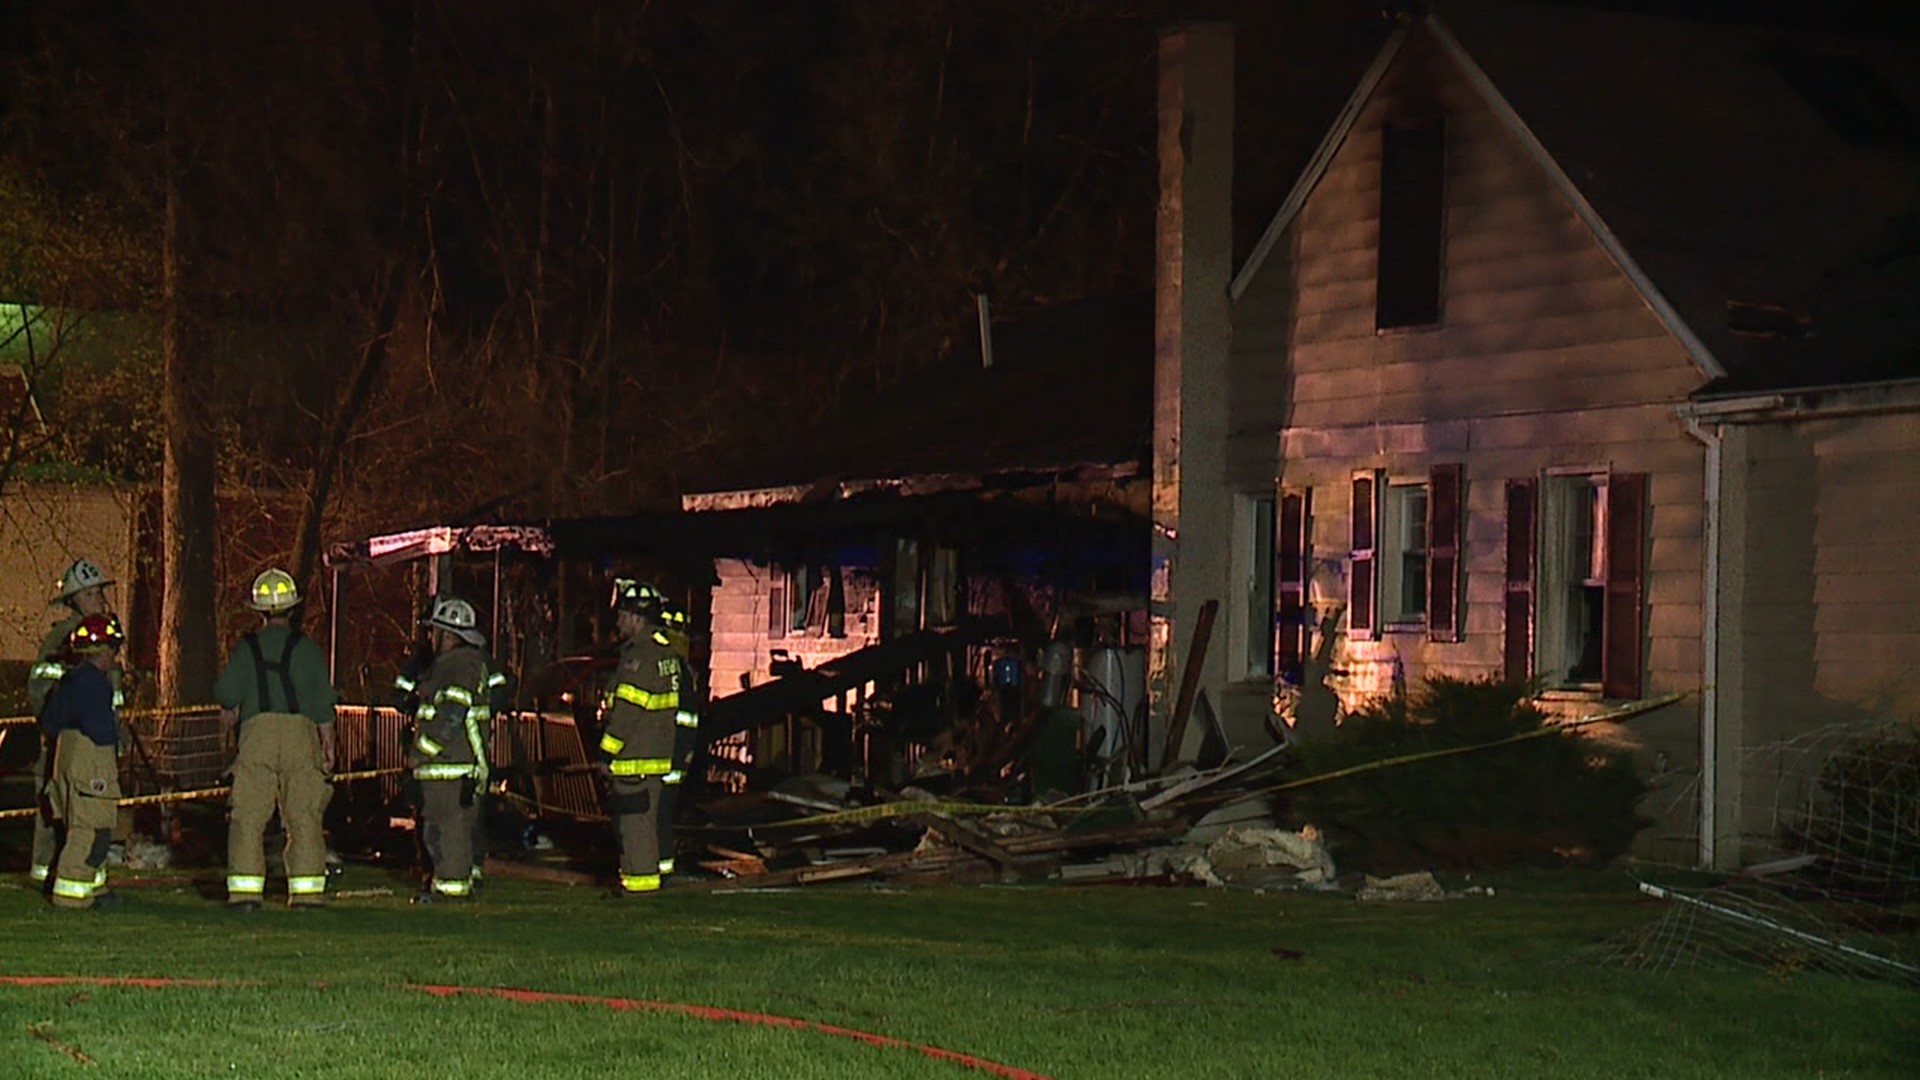 Several explosions were heard at the home in Cogan Station followed by the fire.